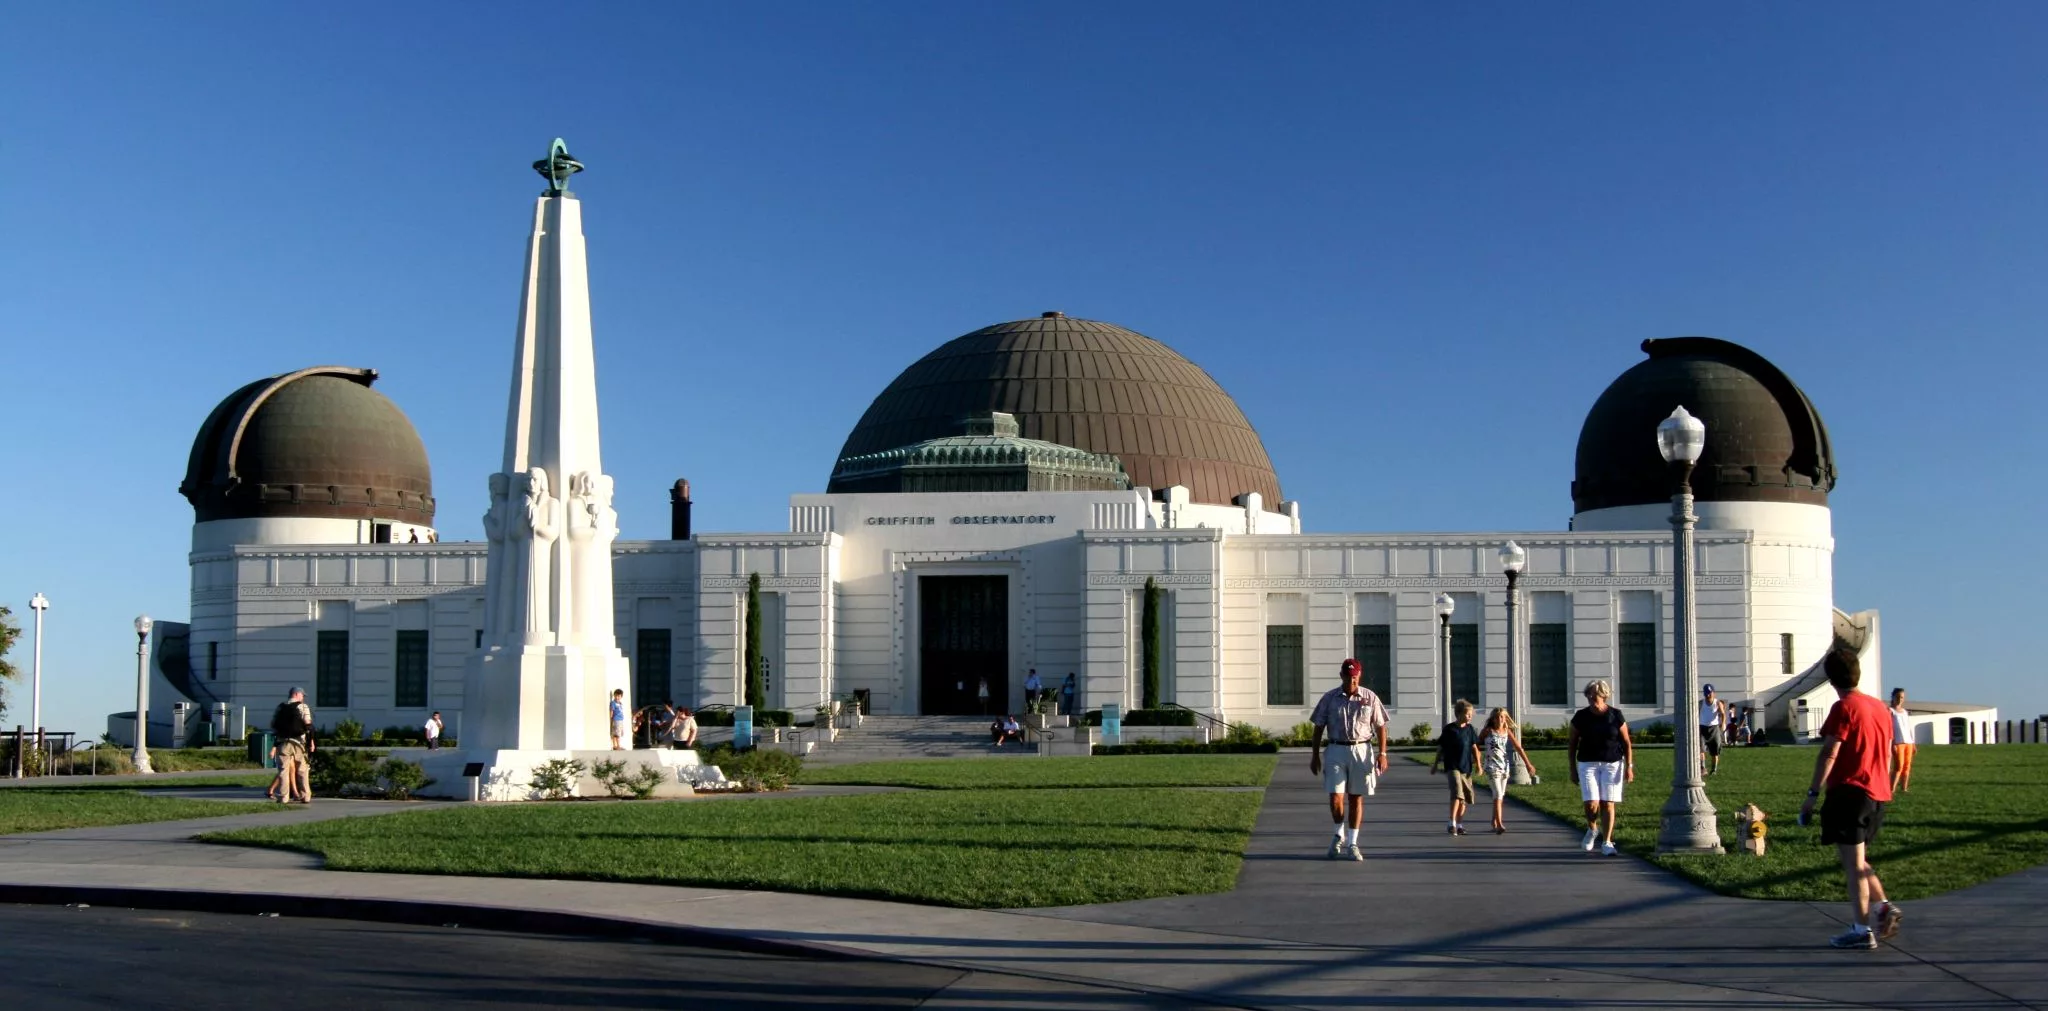 Griffith Observatory Los Angeles Usa.webp?h=1400&q=83